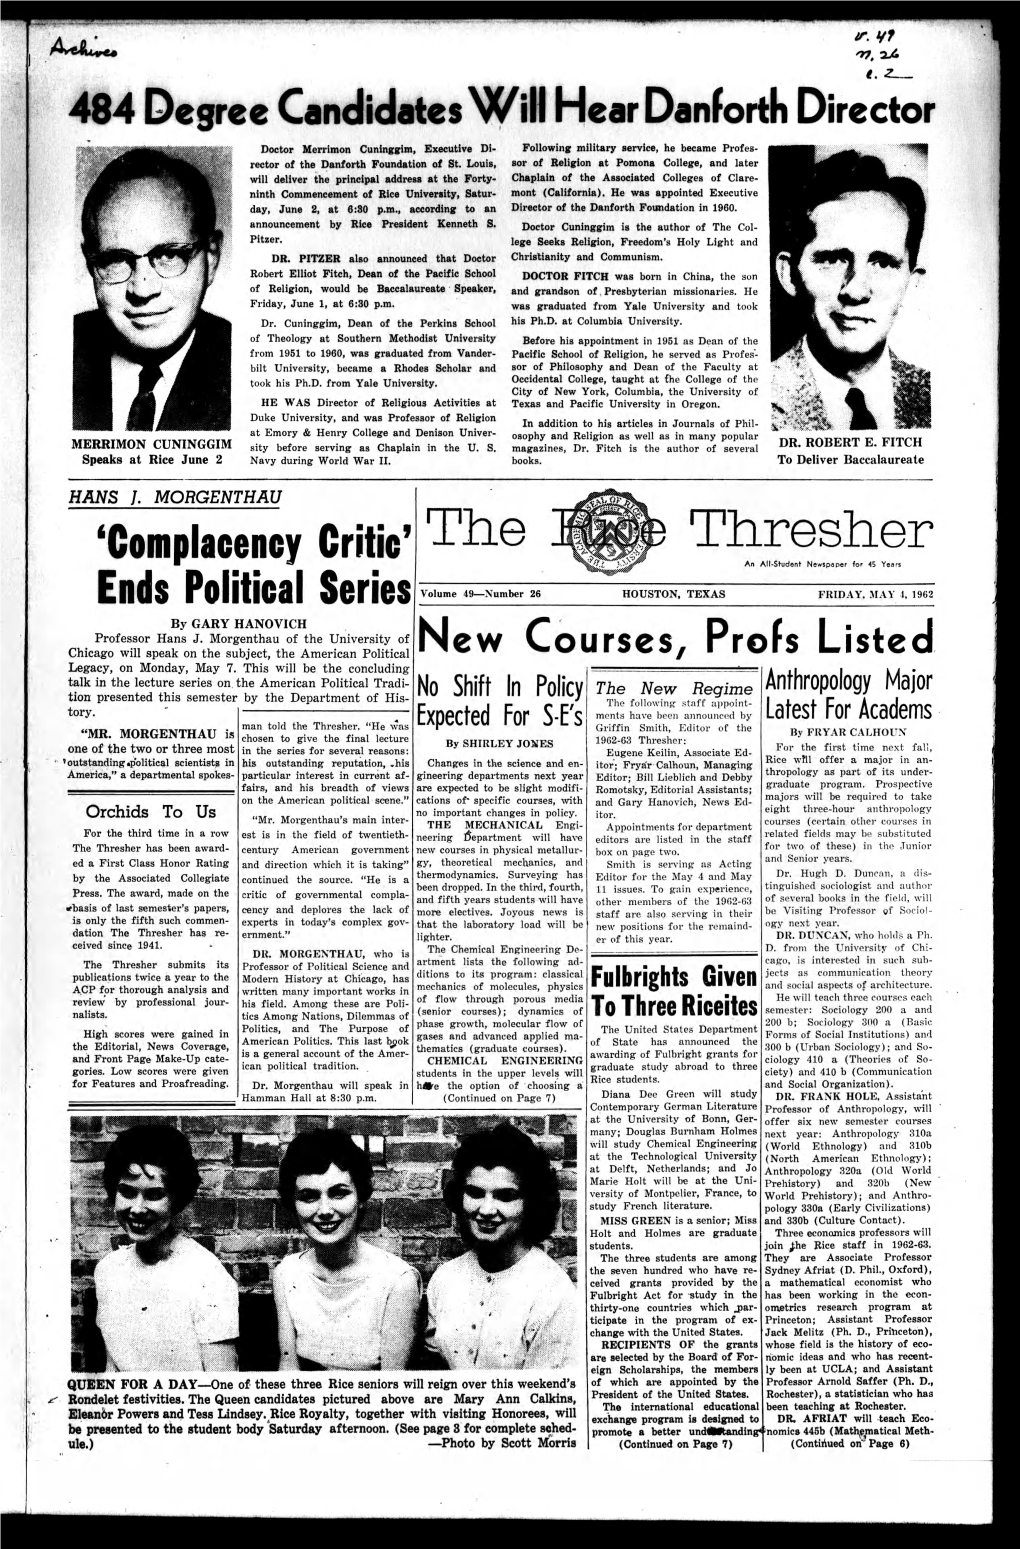 The Thresher an All-Student Newspaper for 45 Years Ends Political Series Volume 49—Number 26 HOUSTON, TEXAS FRIDAY, MAY 4, 1962 by GARY HANOVICH Professor Hans J